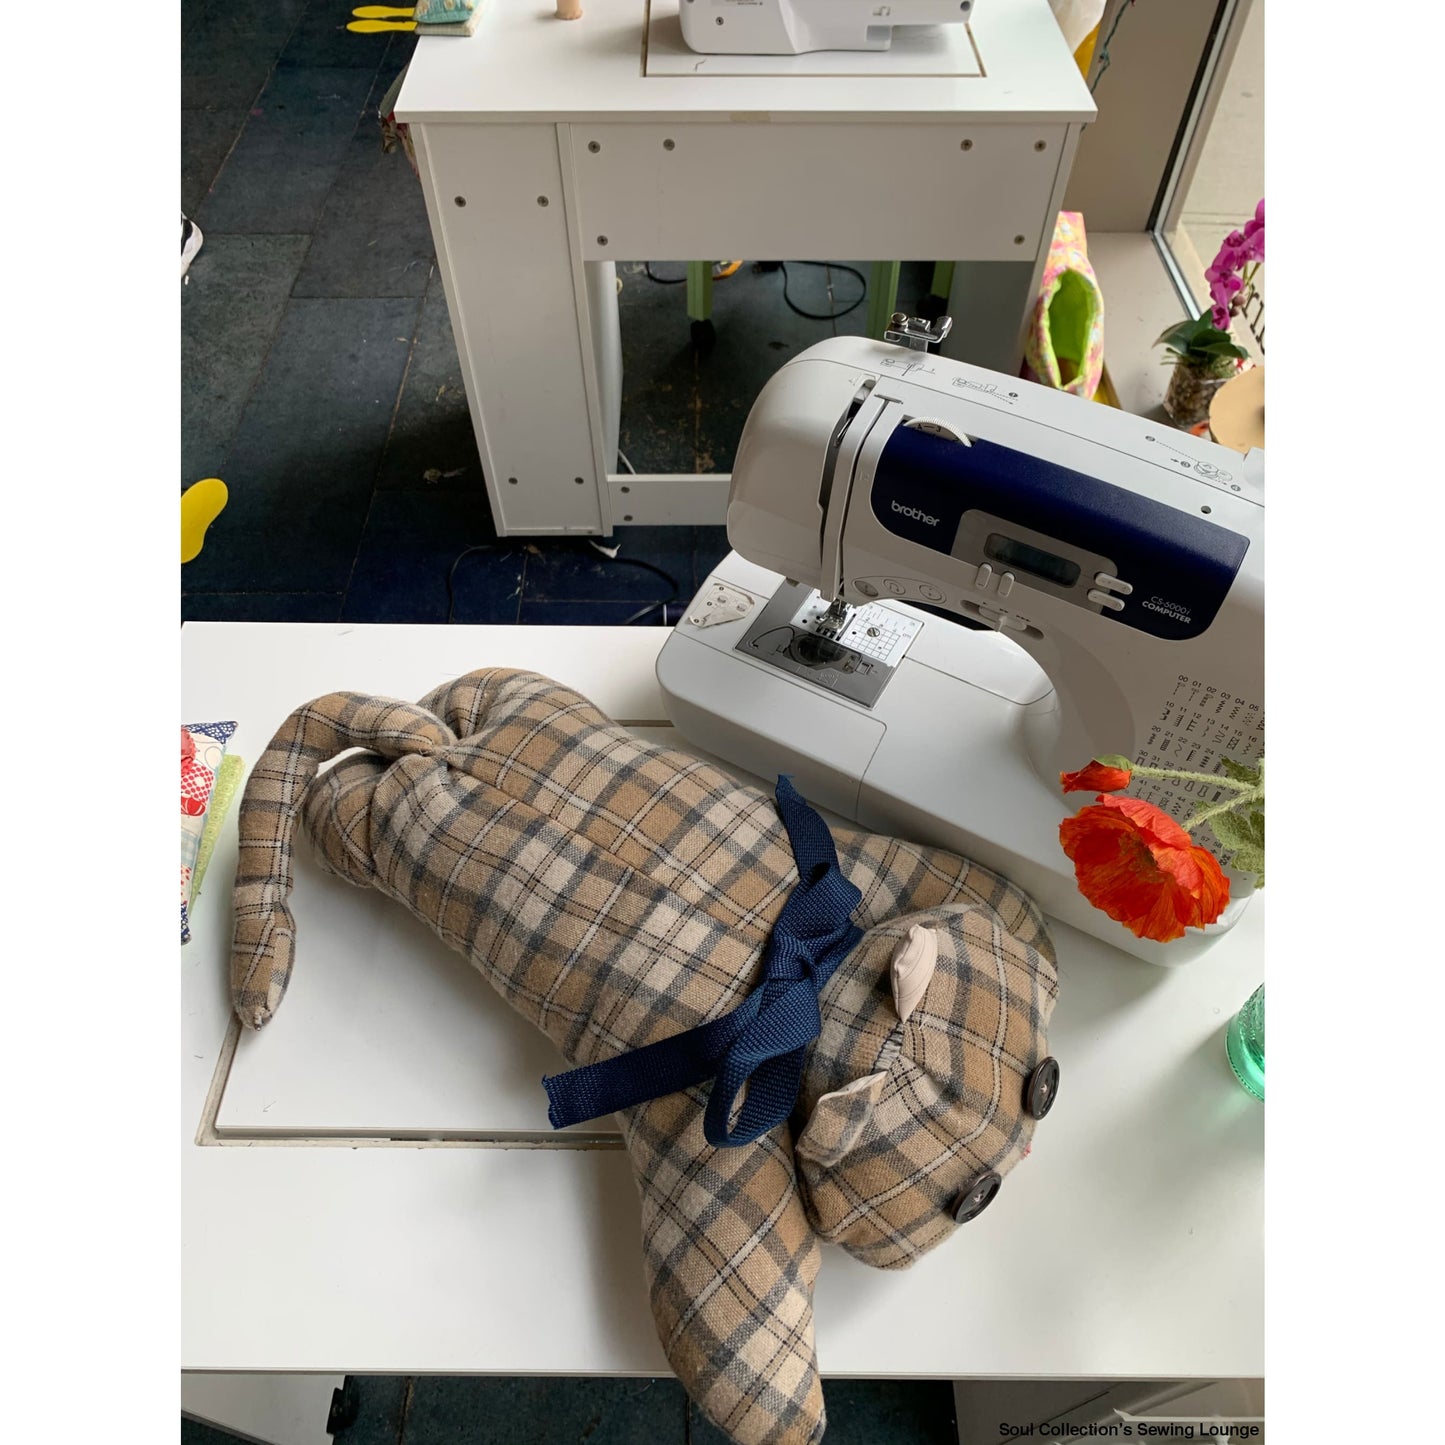 Afterschool In Shop Sewing Classes - Jan 27th, Thursday - Kids Sewing Classes